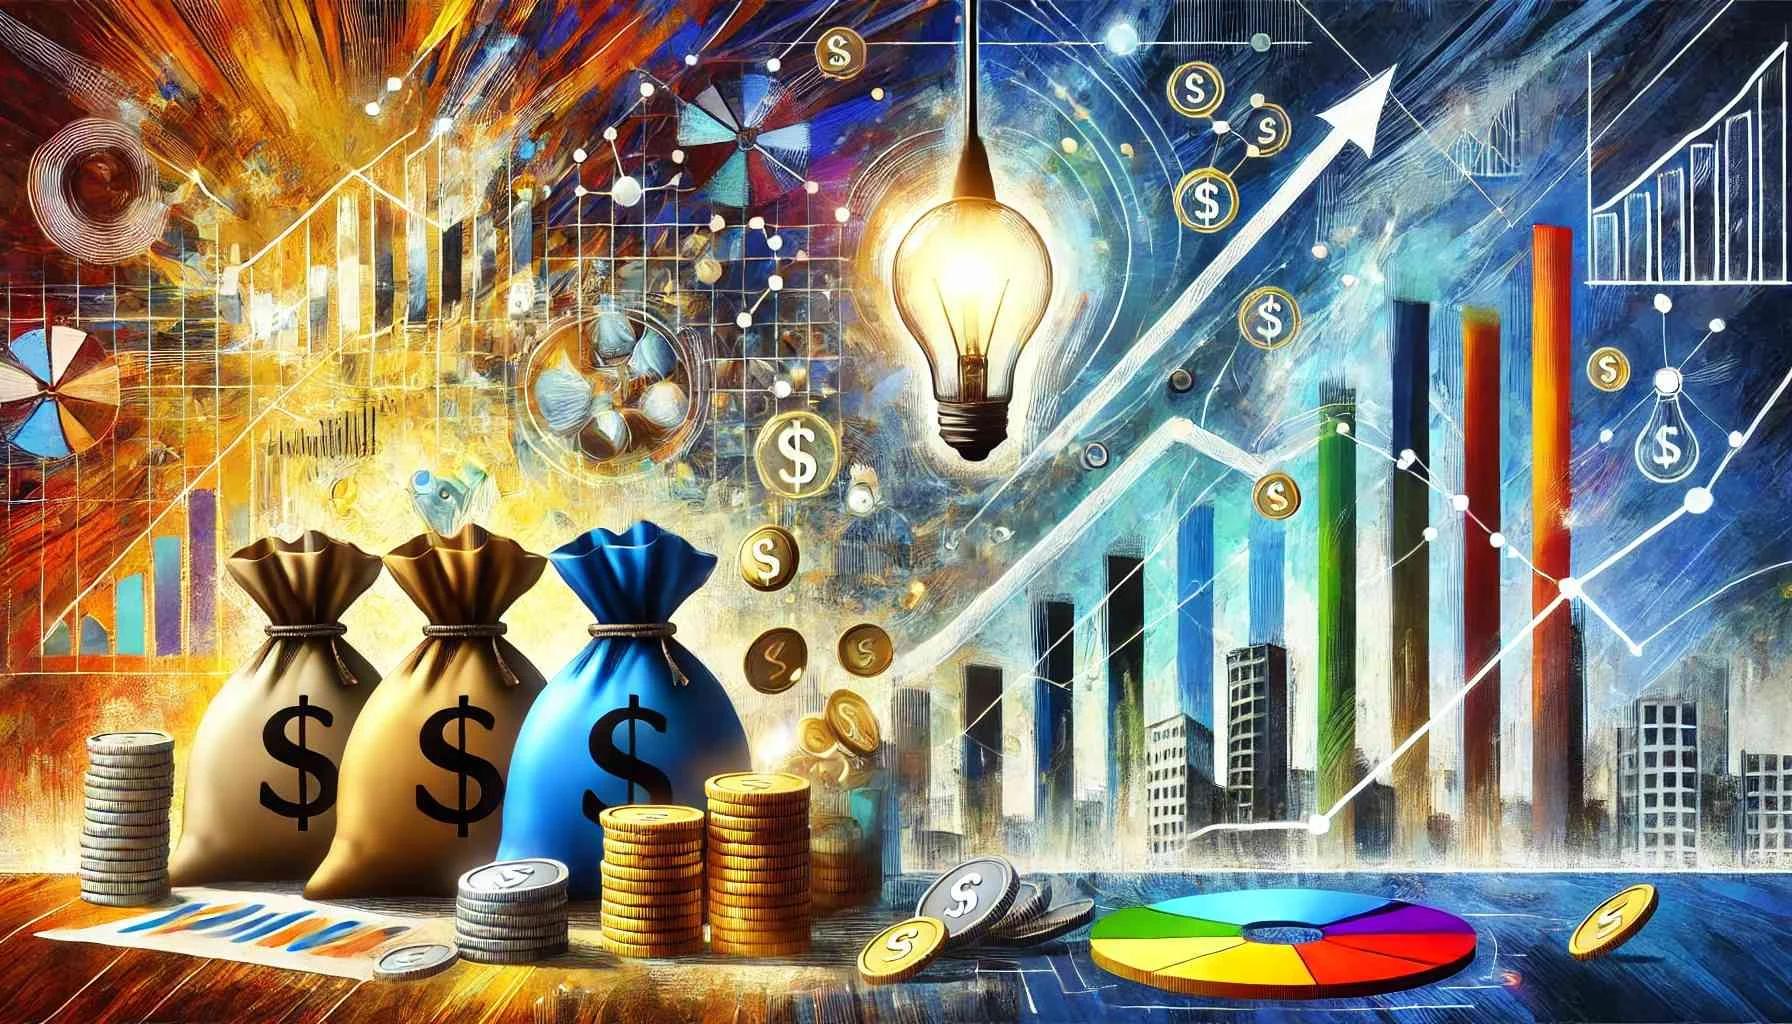 Tion Of Economic Benefits Featuring Elements Like Money Bags Coins Graphs Showing Growth And A Light Bulb Symbolizing Ideas. 20240704 1502